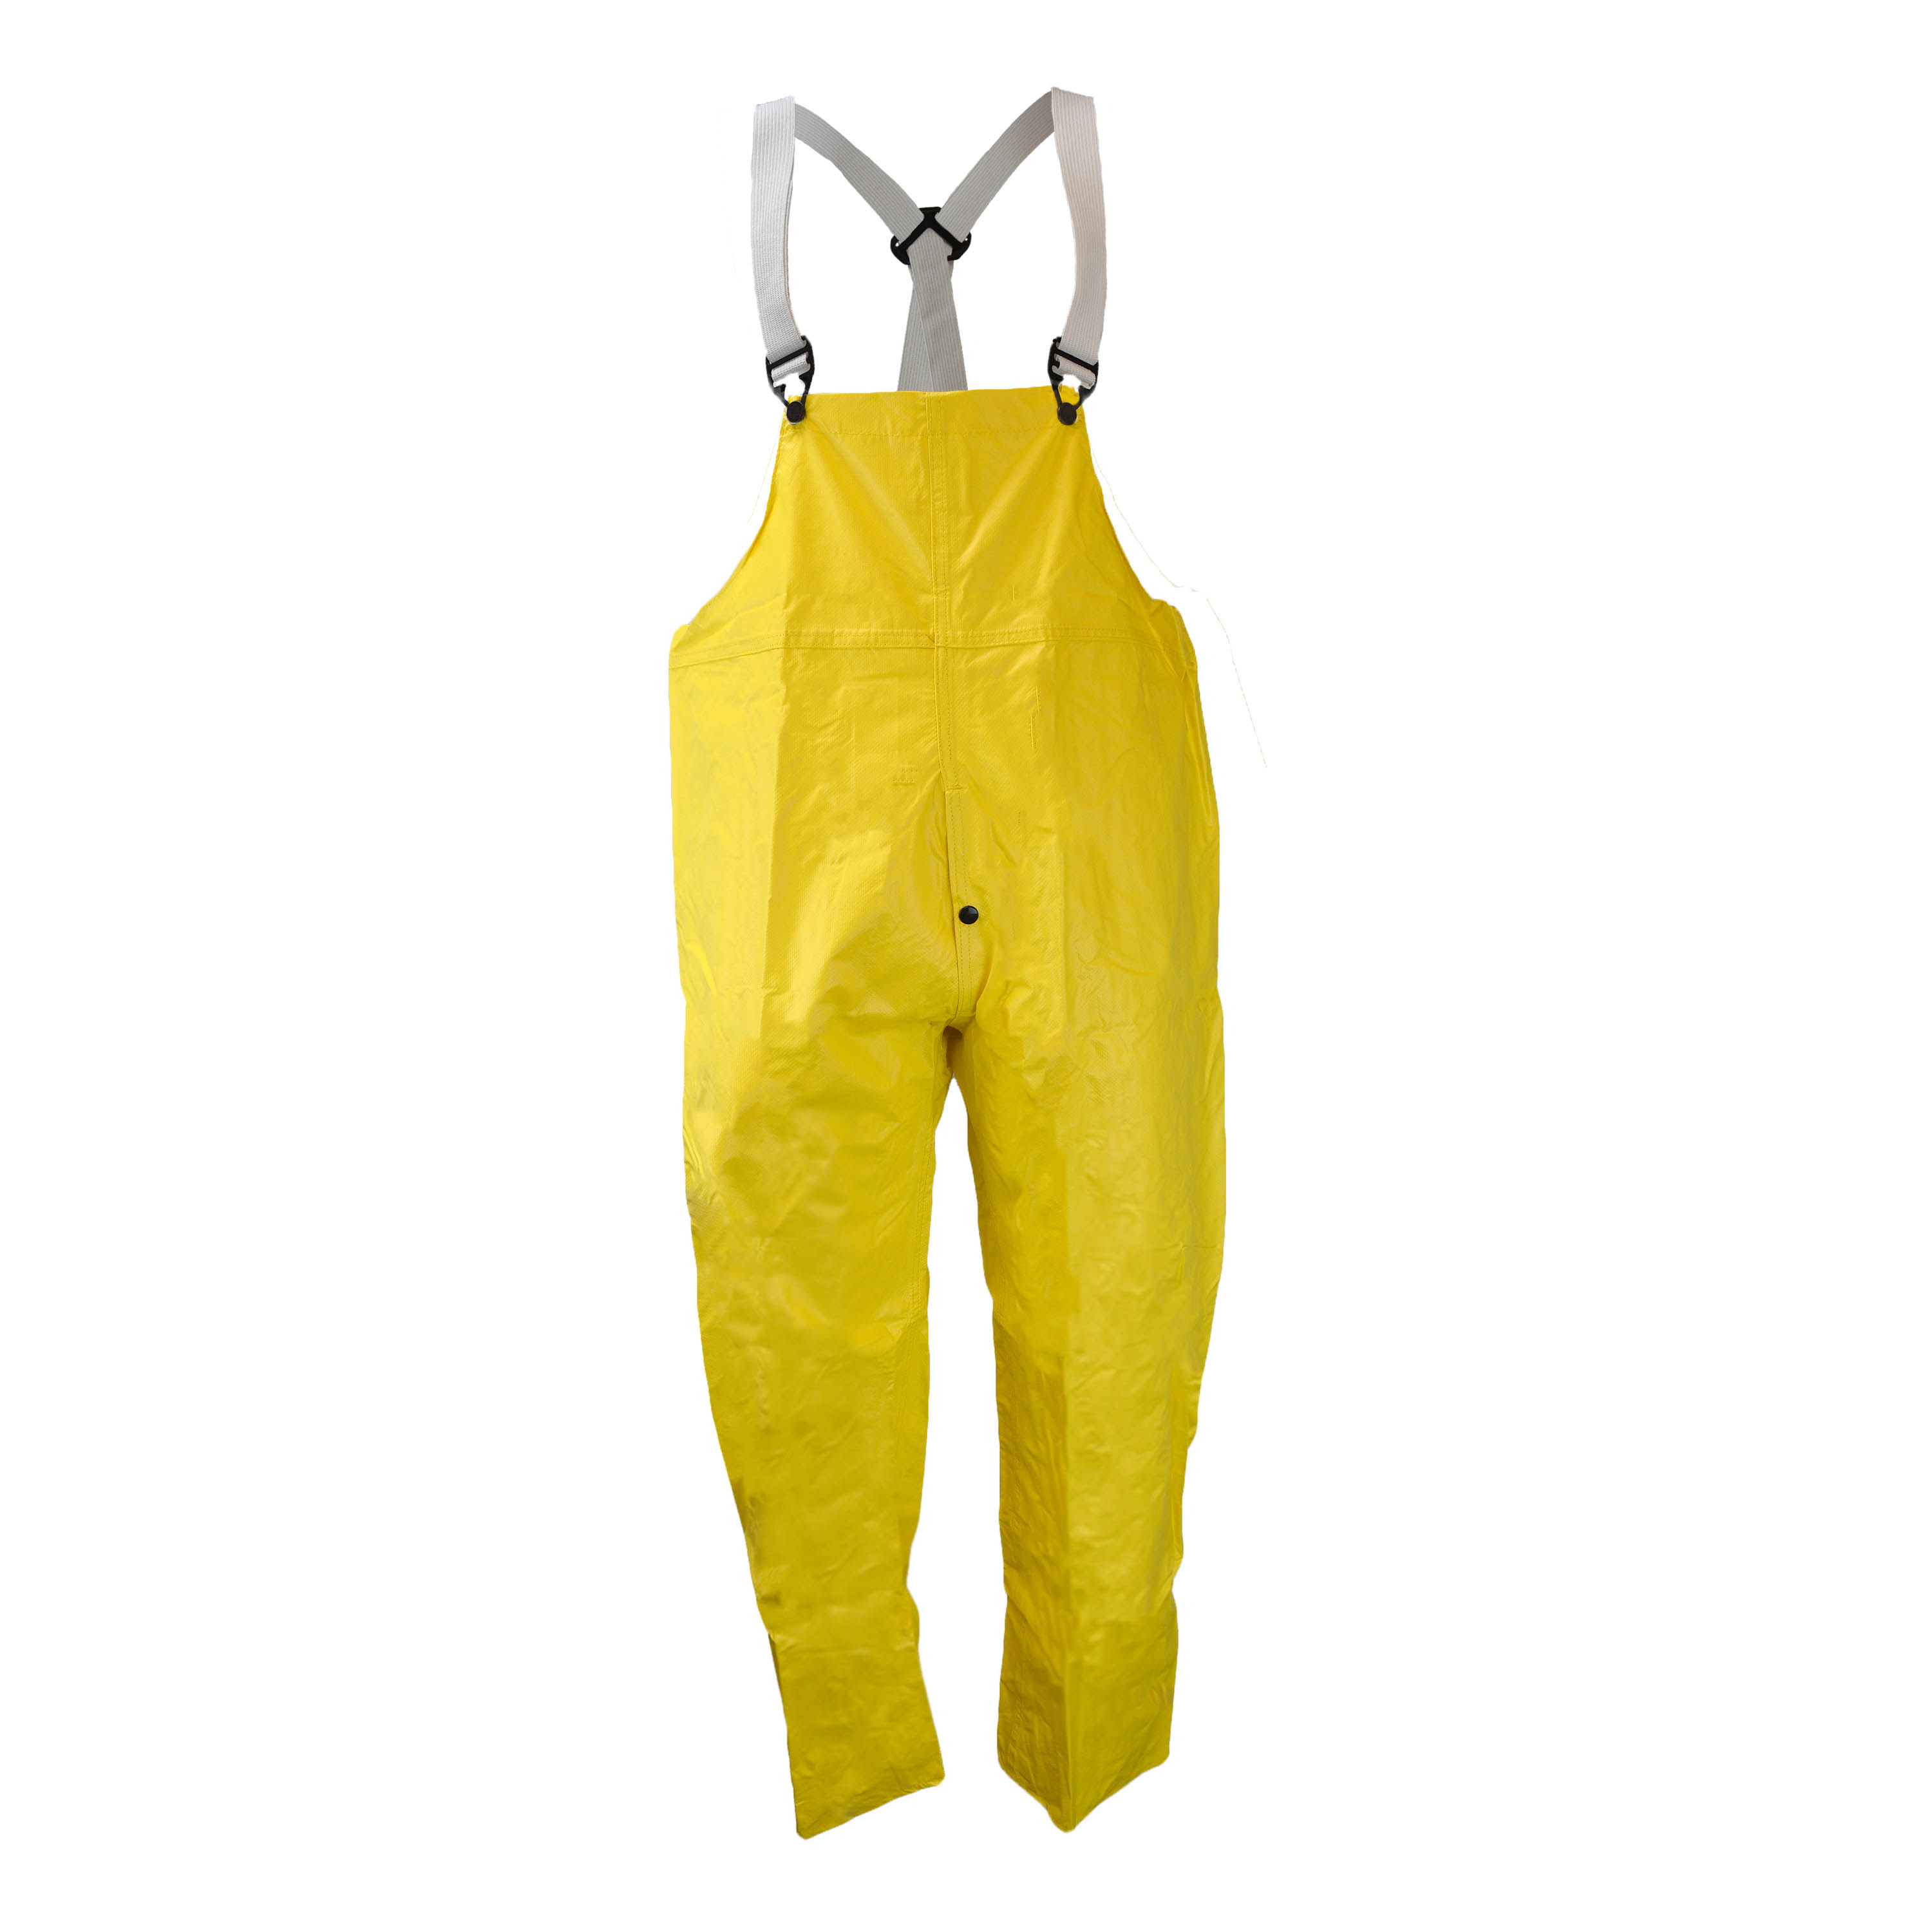 Universal 35 Bib Trouser with Fly - Safety Yellow - Size XL